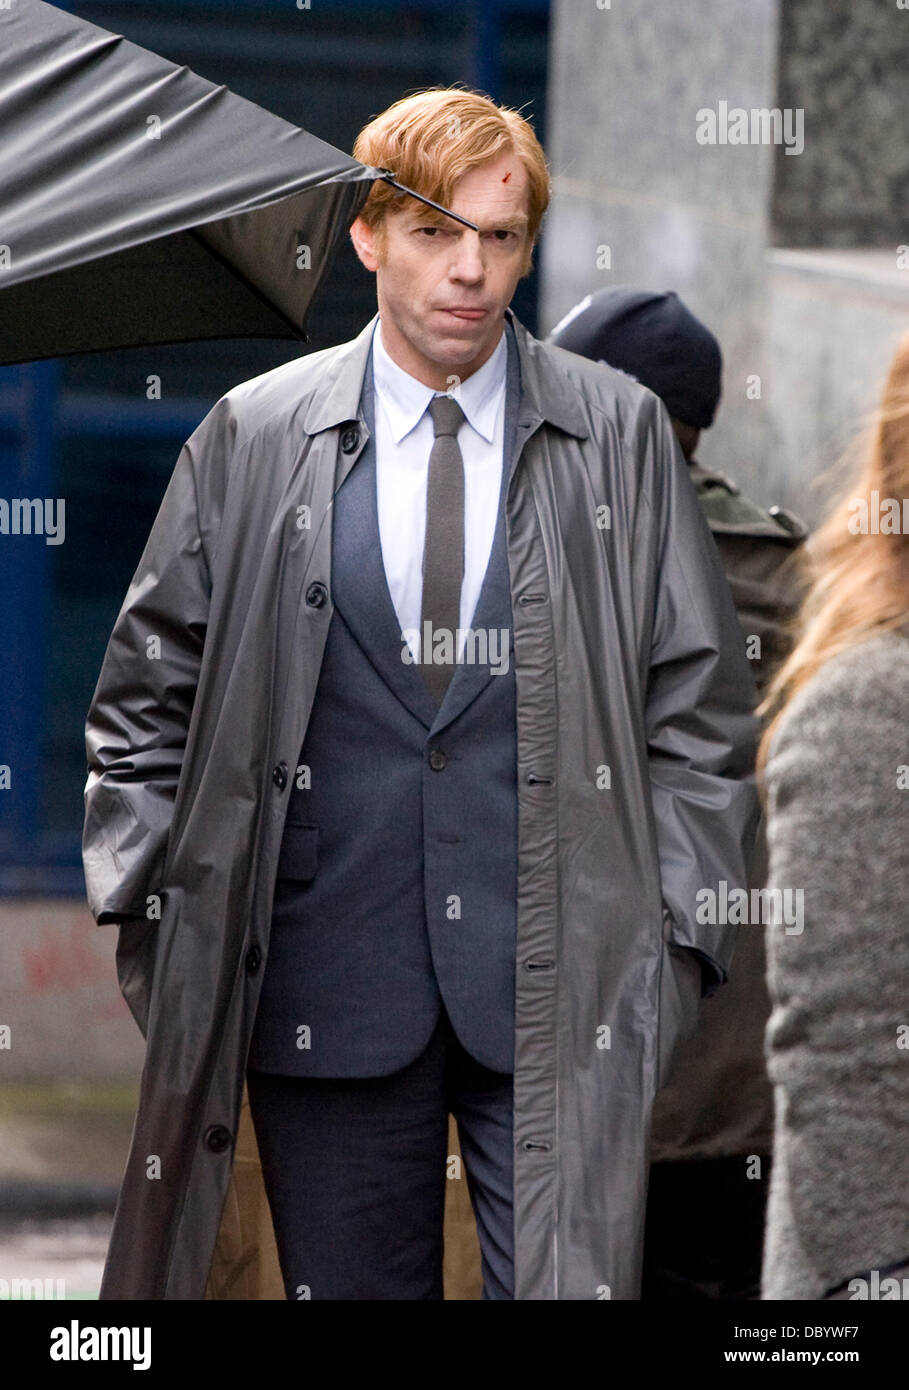 Latest Hugo Weaving pics from the set of Cloud Atlas in Glasgow